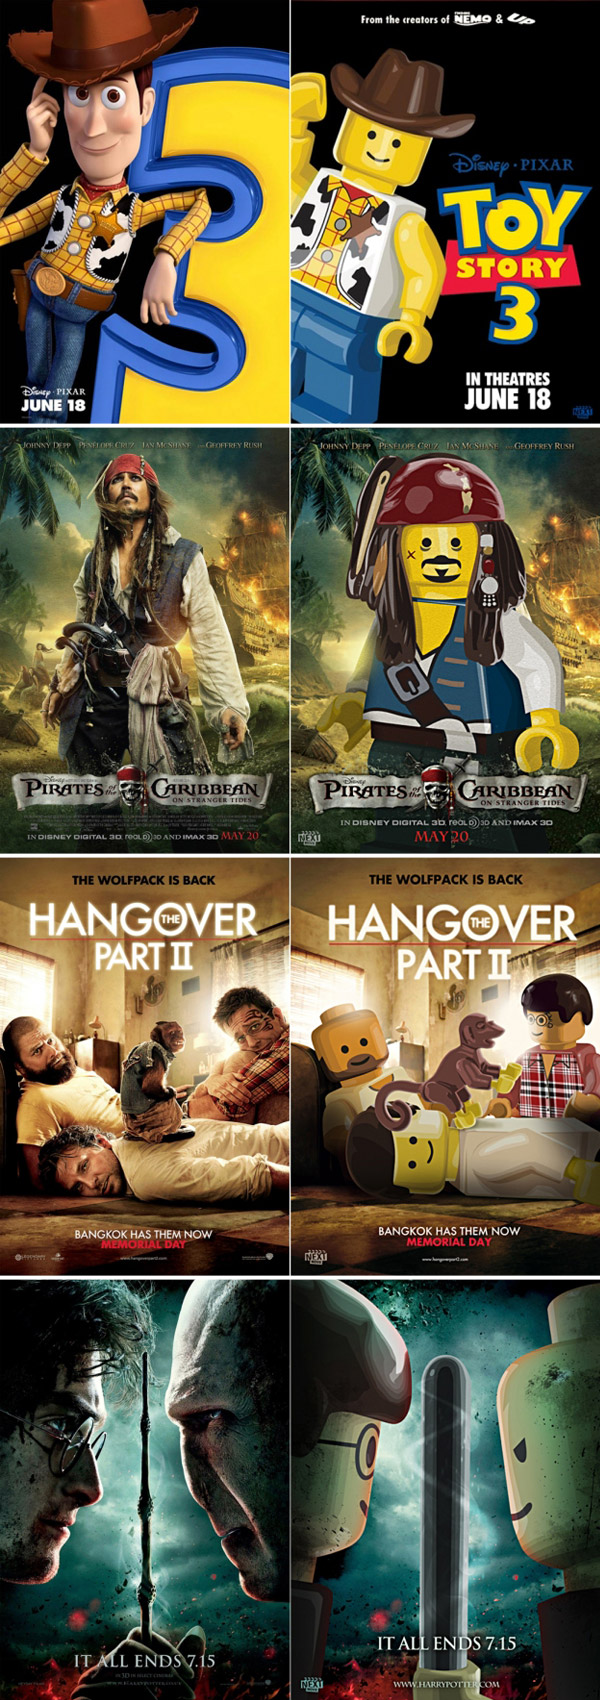 Lego movies posters